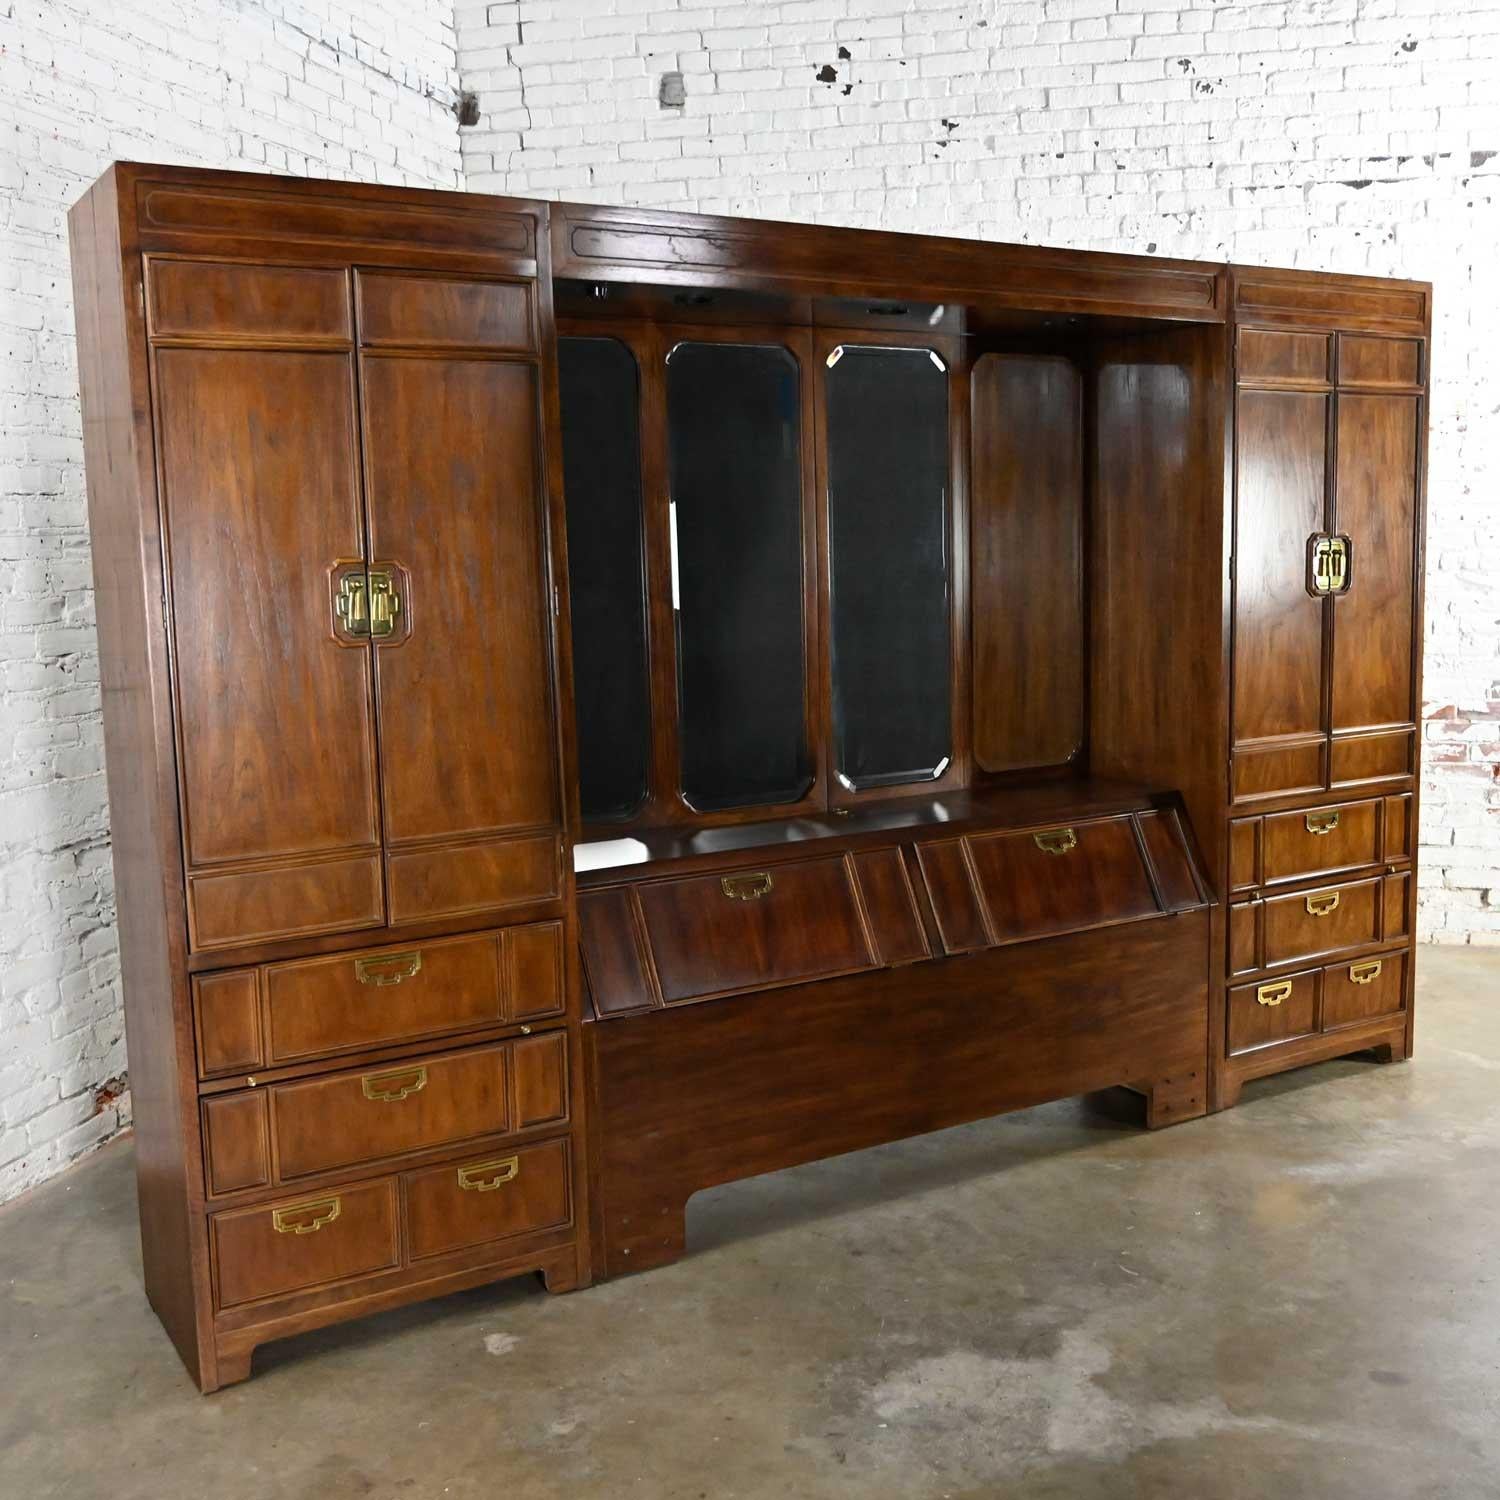 Wonderful campaign style modular wall unit bedroom or bed set up with side armoires comprised of dark wood, removeable mirrors, lights, full/queen headboard, and brass hardware by Thomasville Furniture. Beautiful condition, keeping in mind that this